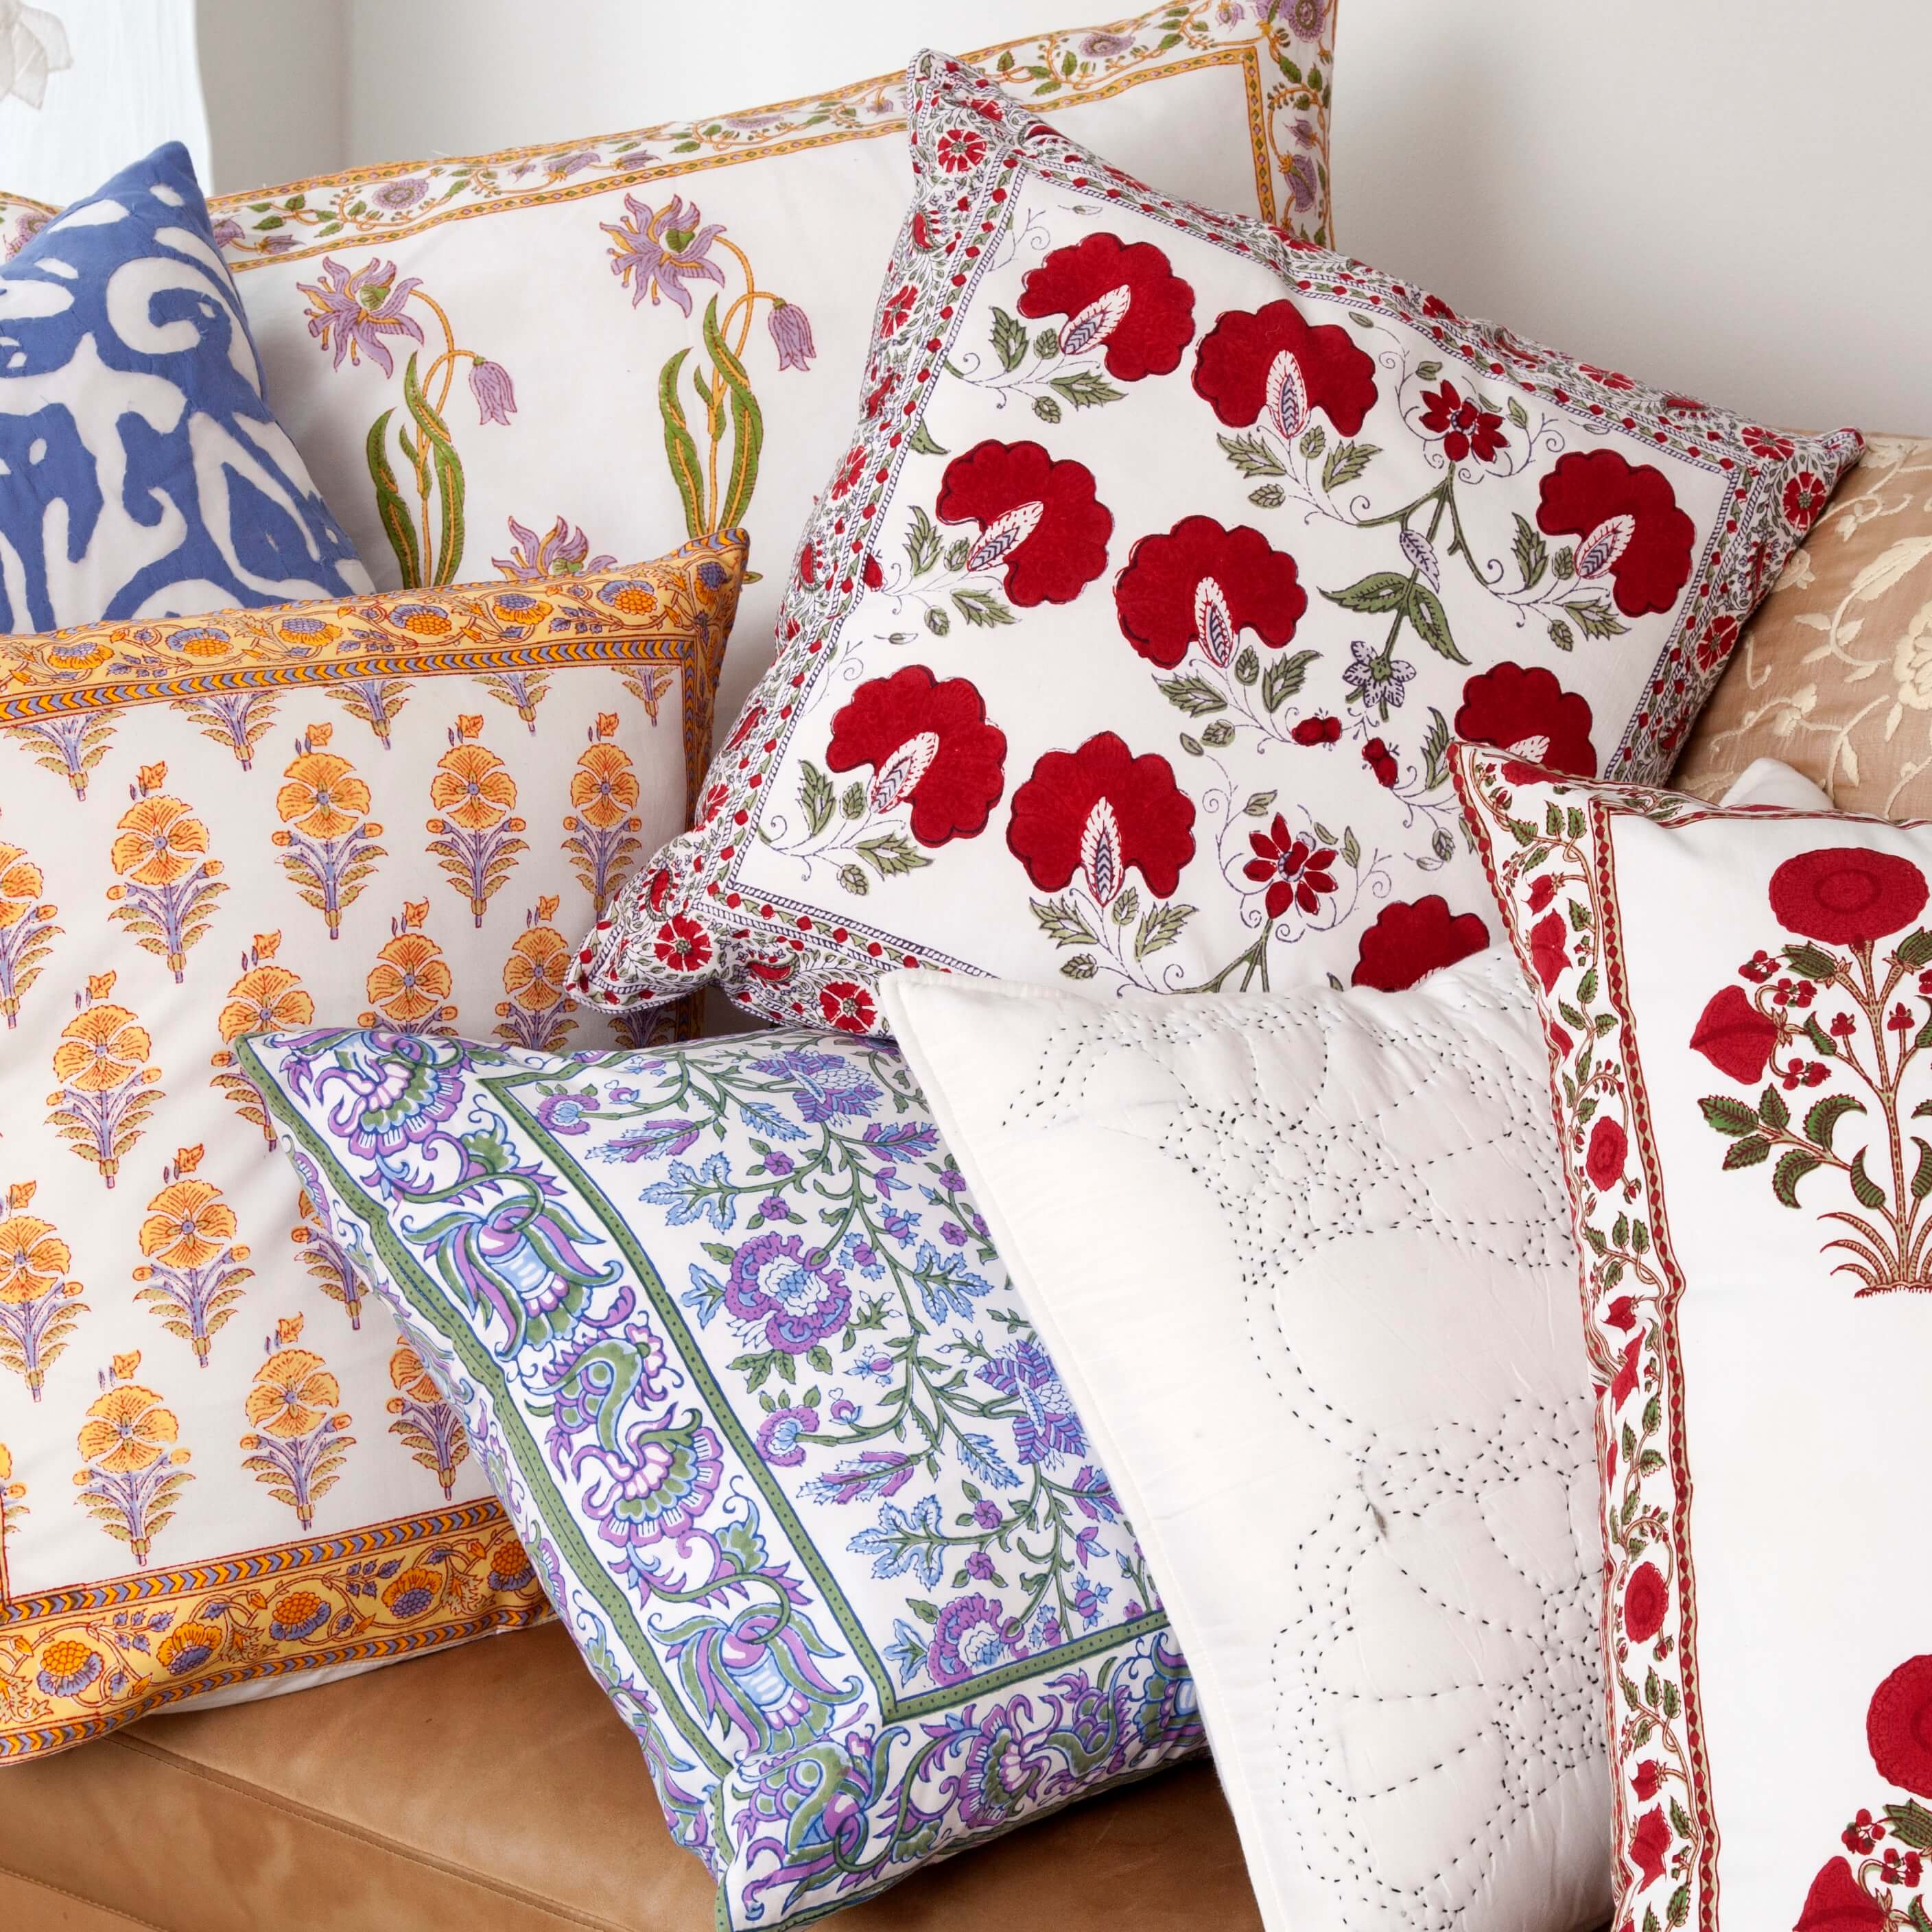 https://marigoldliving.com/mm5/graphics/00000001/2/Pillow%20Covers%20-%20VIEW%20ALL%20CR.jpg